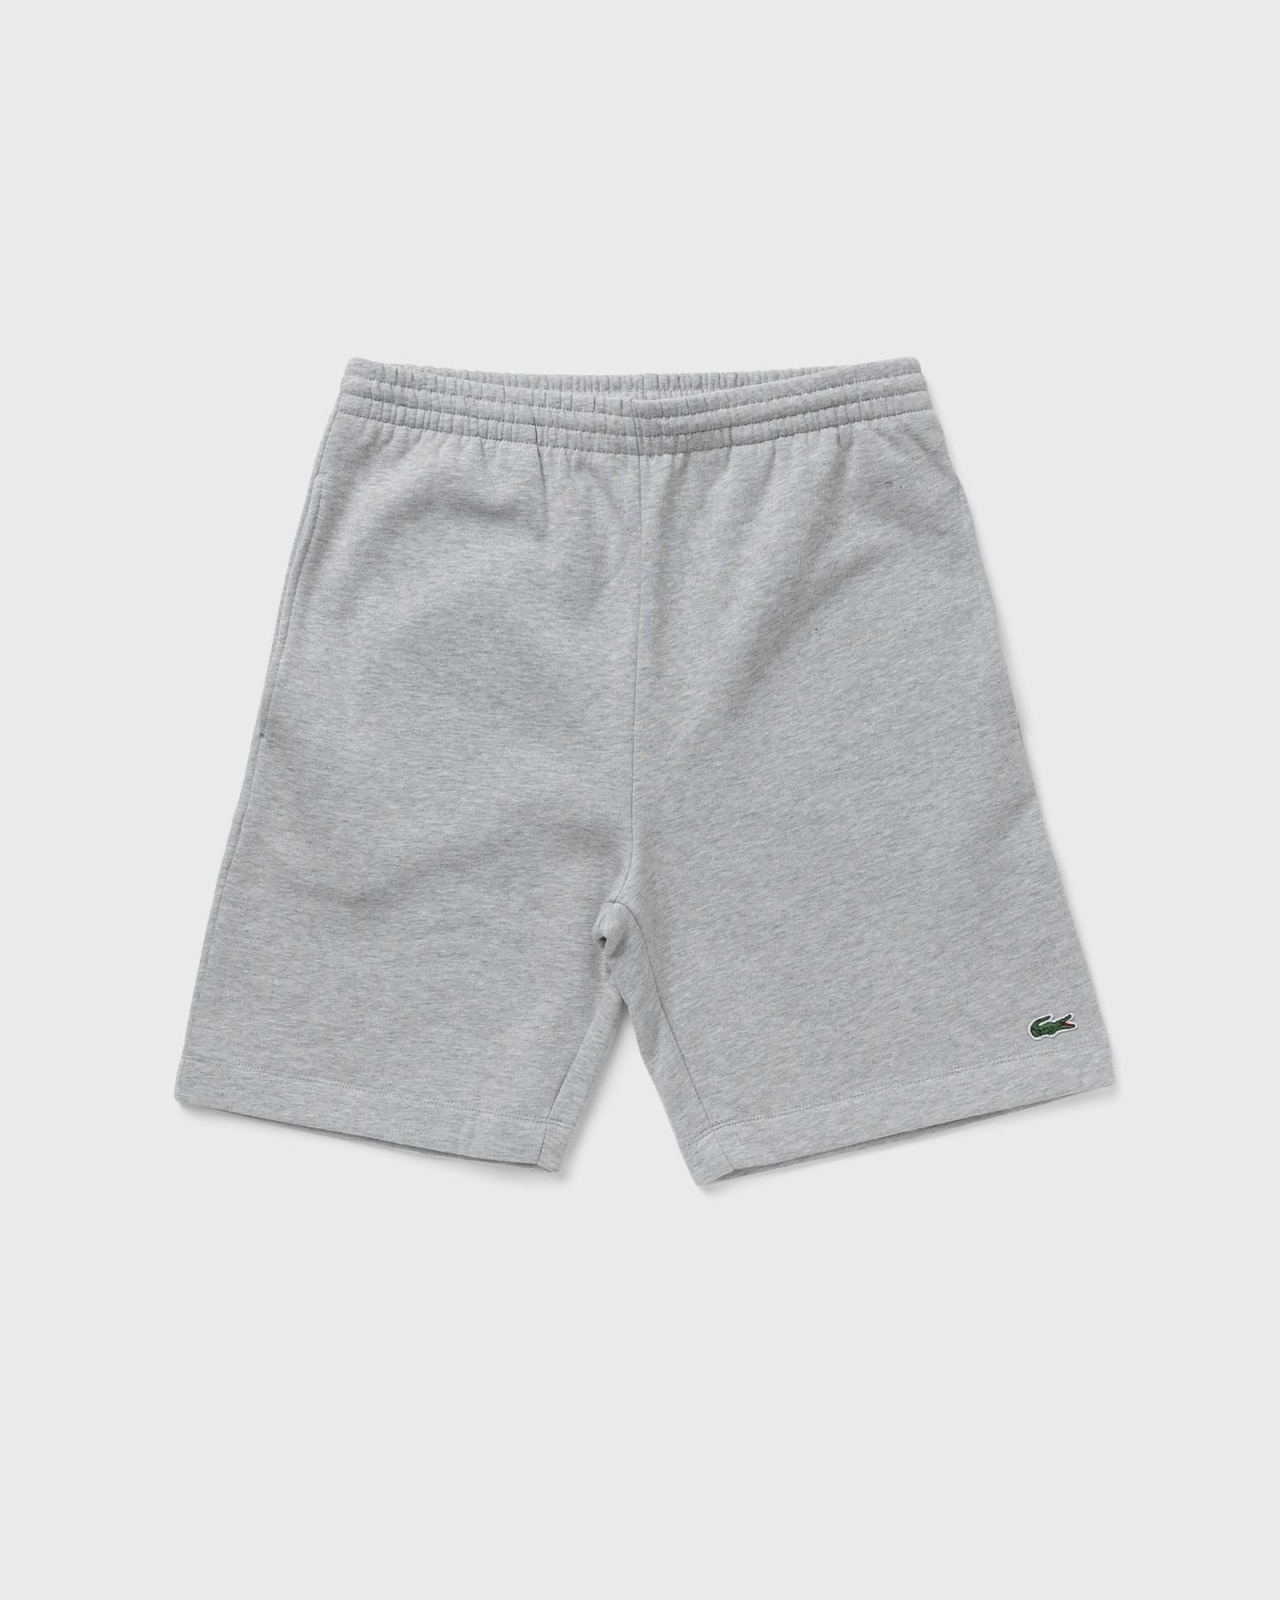 Lacoste Mens Shorts in Grey by Bstn GOOFASH